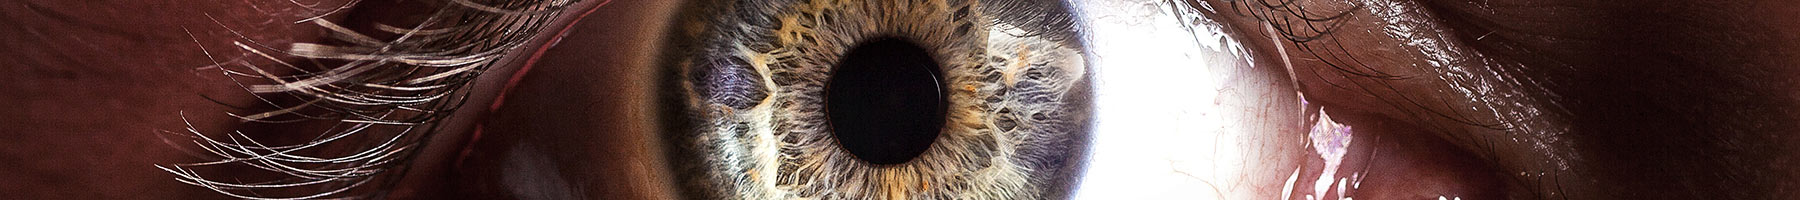 close-up view of a human eye